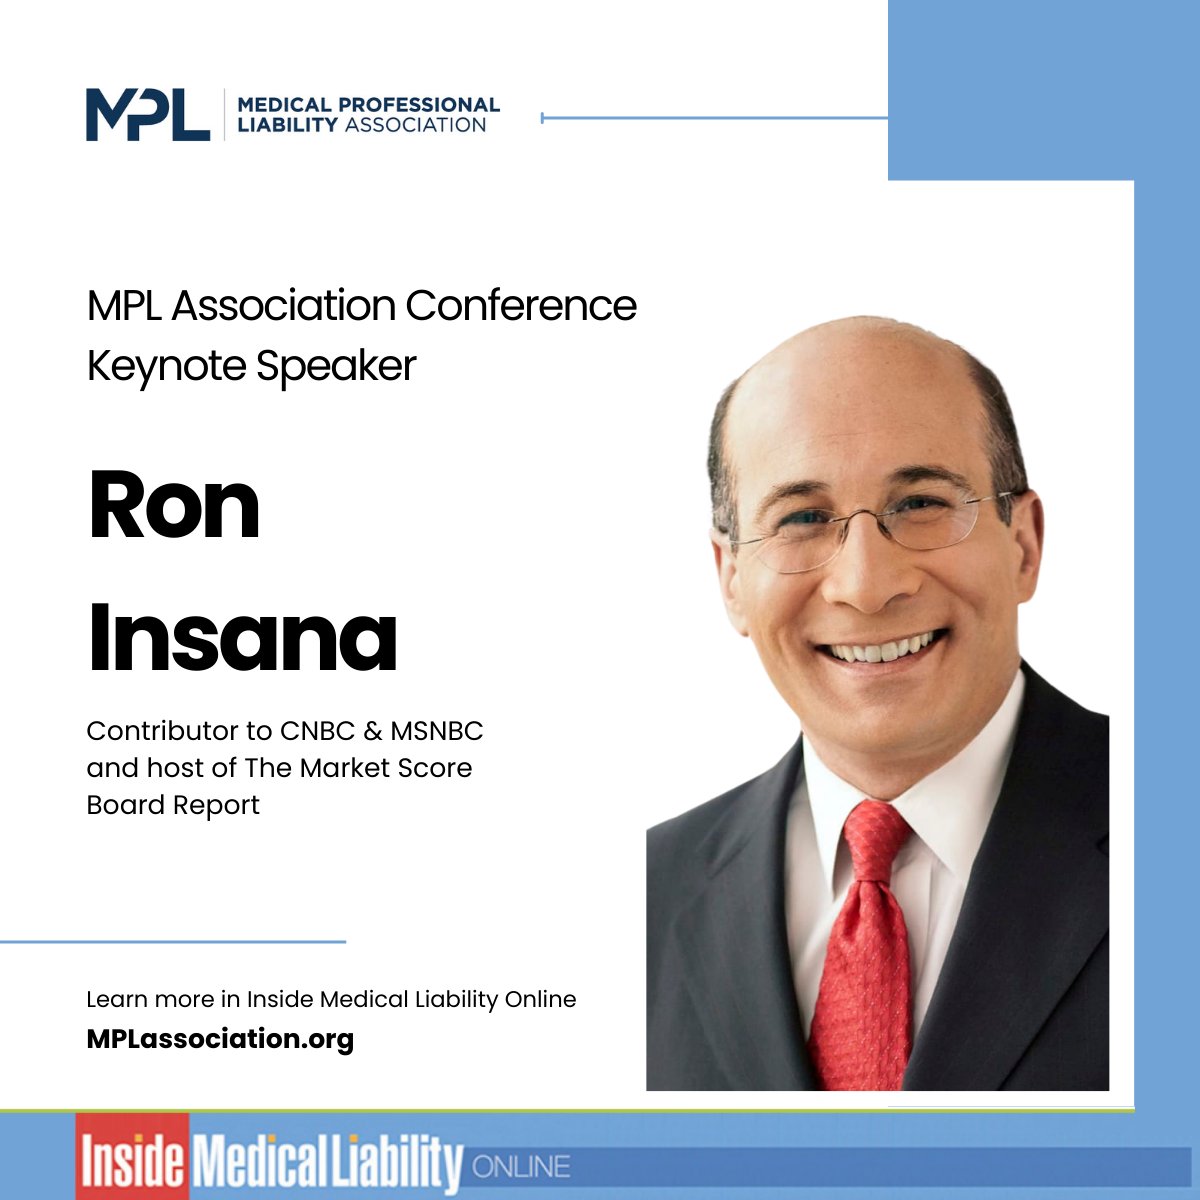 You won’t want to miss this insightful interview with iconic financial journalist @roninsana in advance of his keynote presentation at the MPL Association Annual Conference on May 9: bit.ly/49v3ZMI